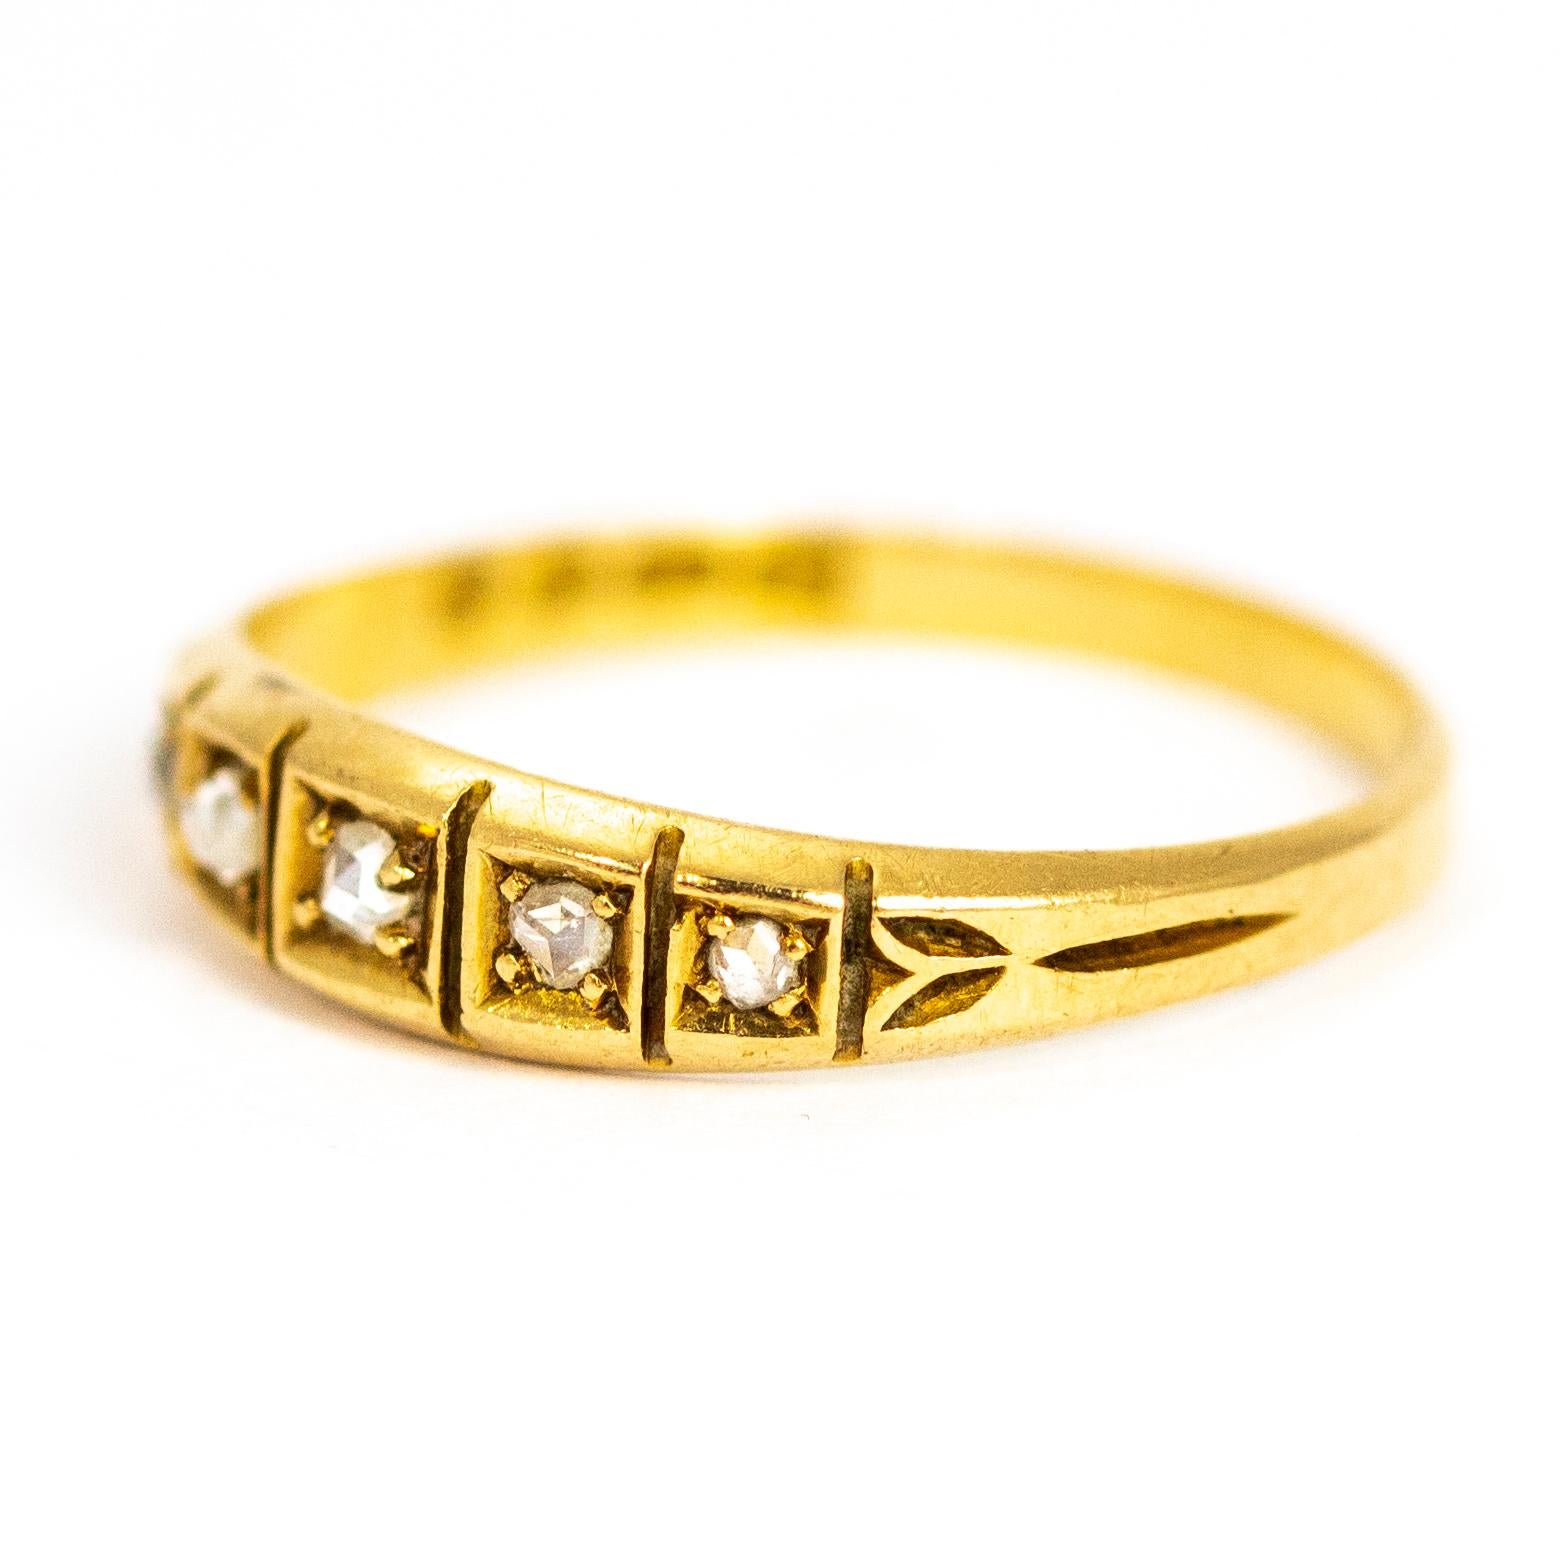 The five rose cut diamonds in this 18 carat gold band are set in graduated square settings. The shoulders of this band feature delicate leaf type detail. made in London, England.

Ring Size: M or 6 1/4
Band Width: 4mm